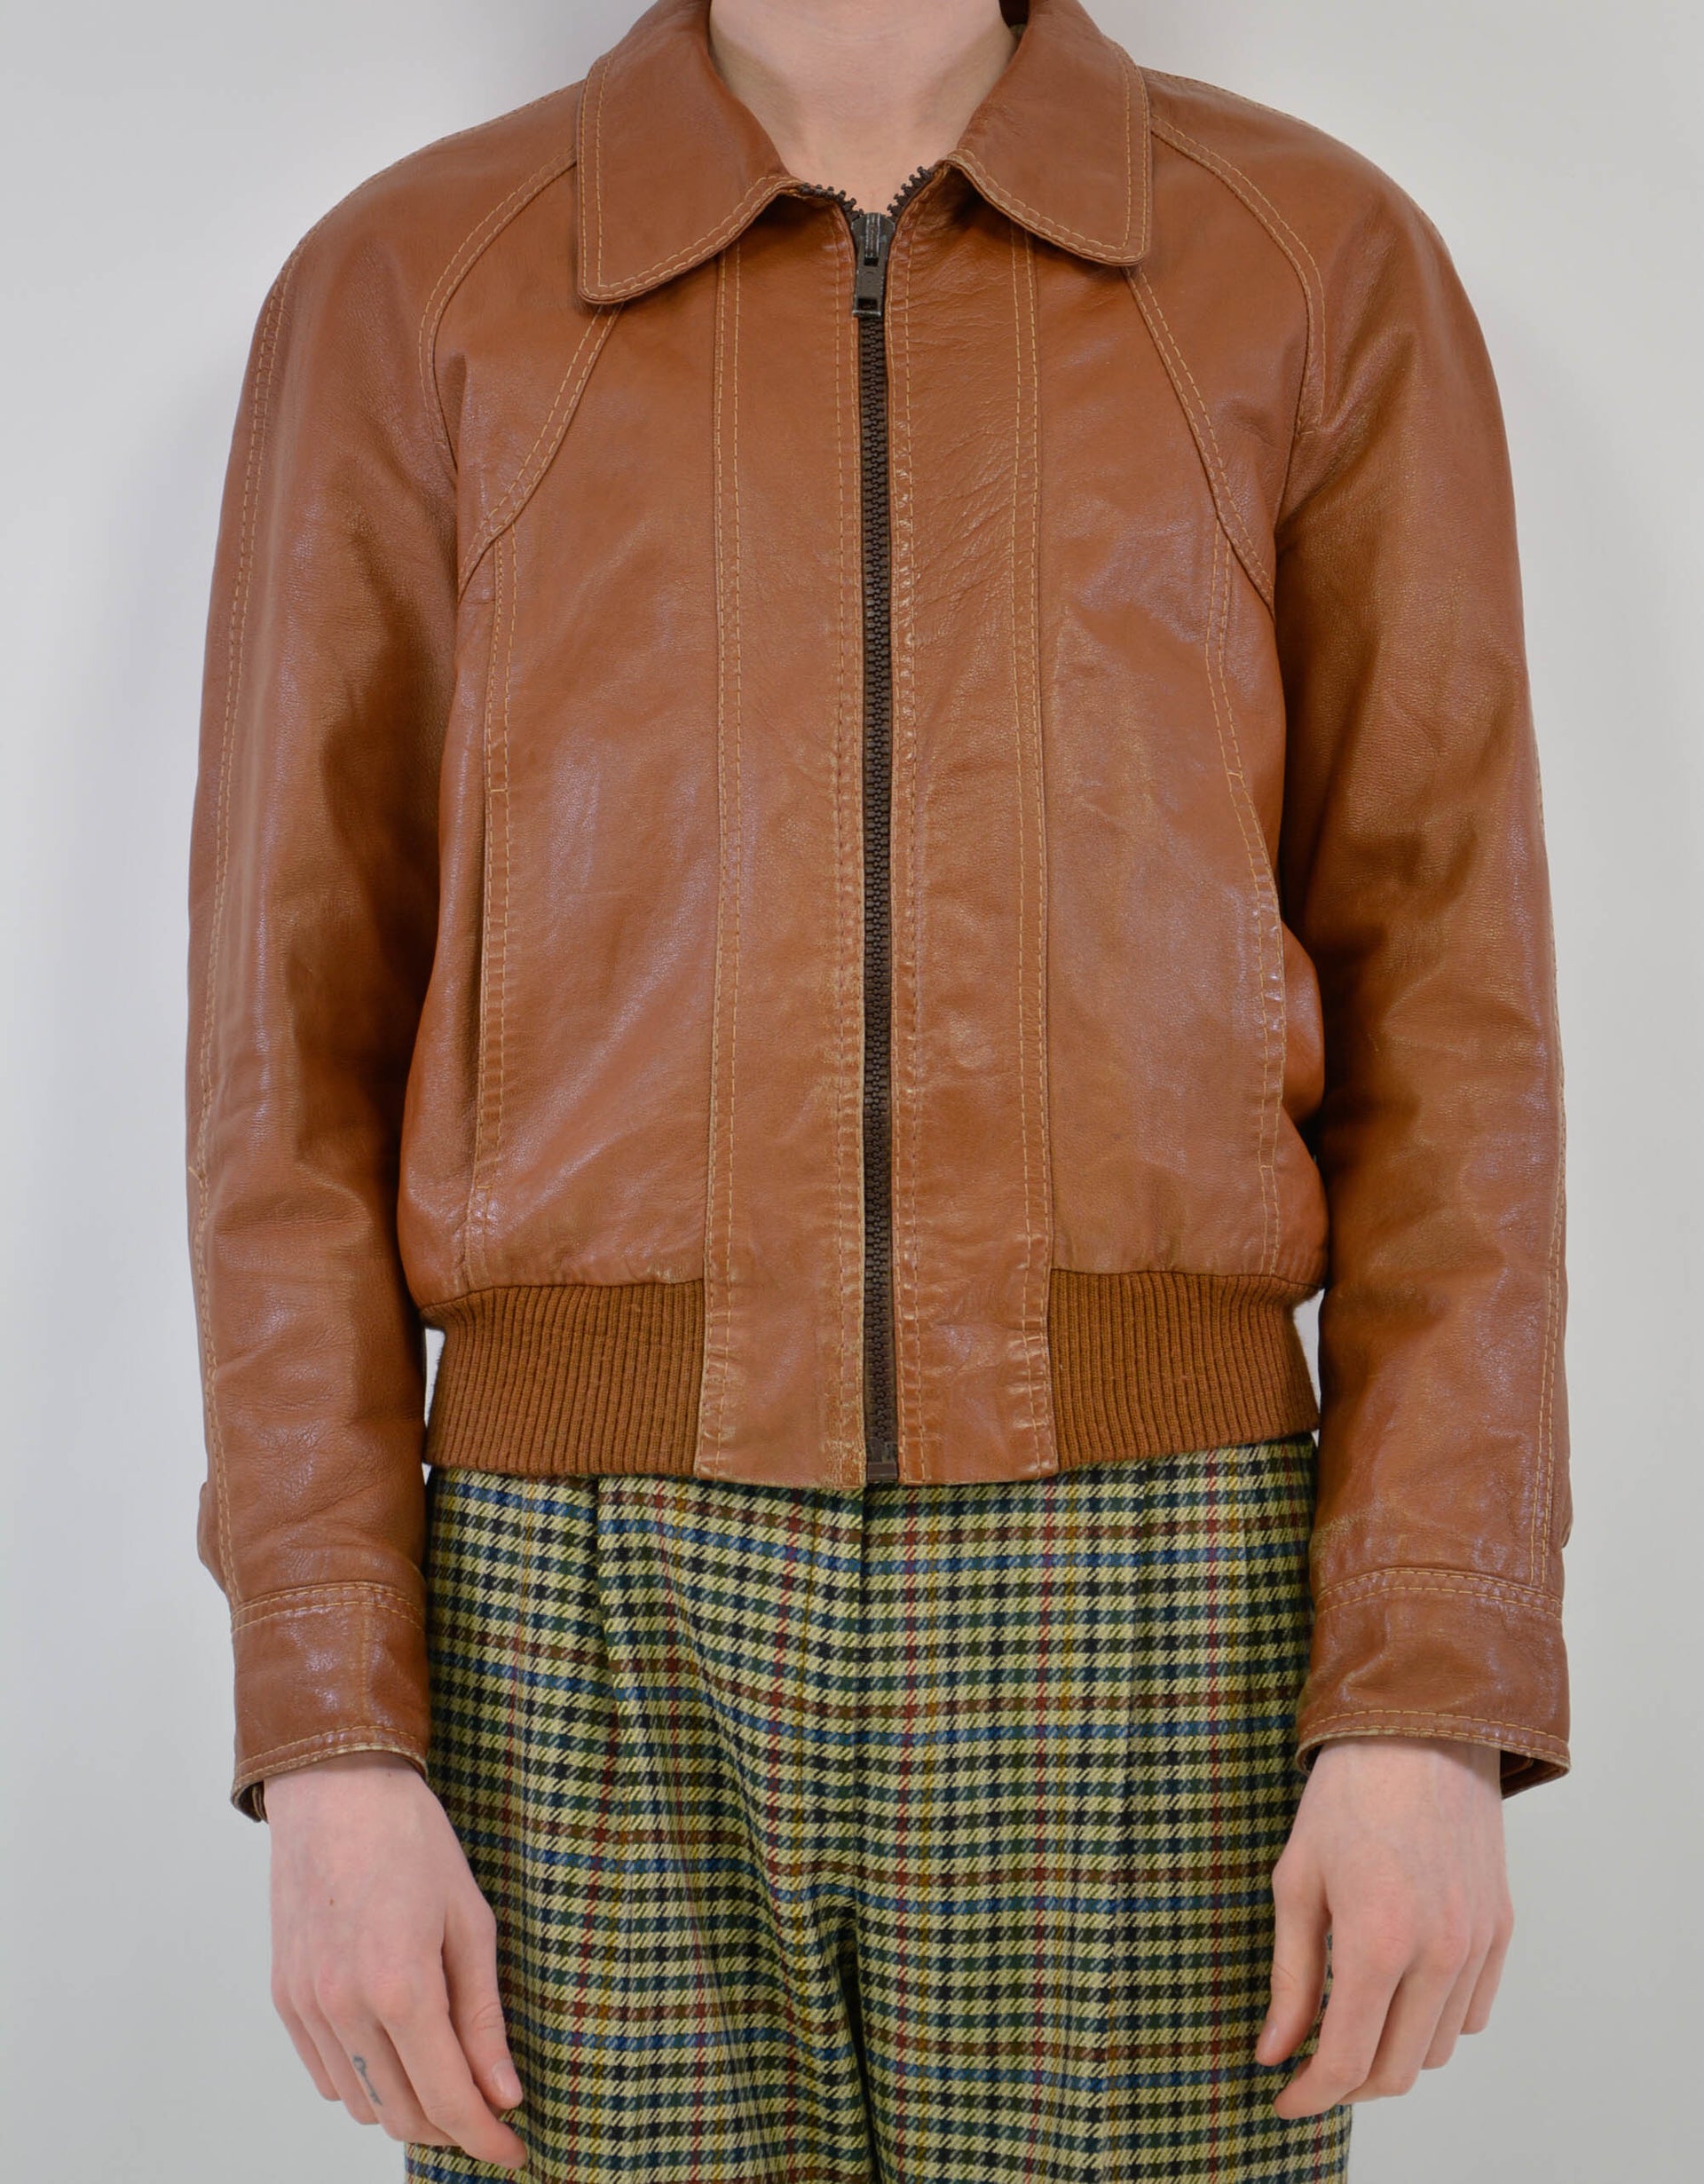 70s brown leather jacket - PICKNWEIGHT - VINTAGE KILO STORE